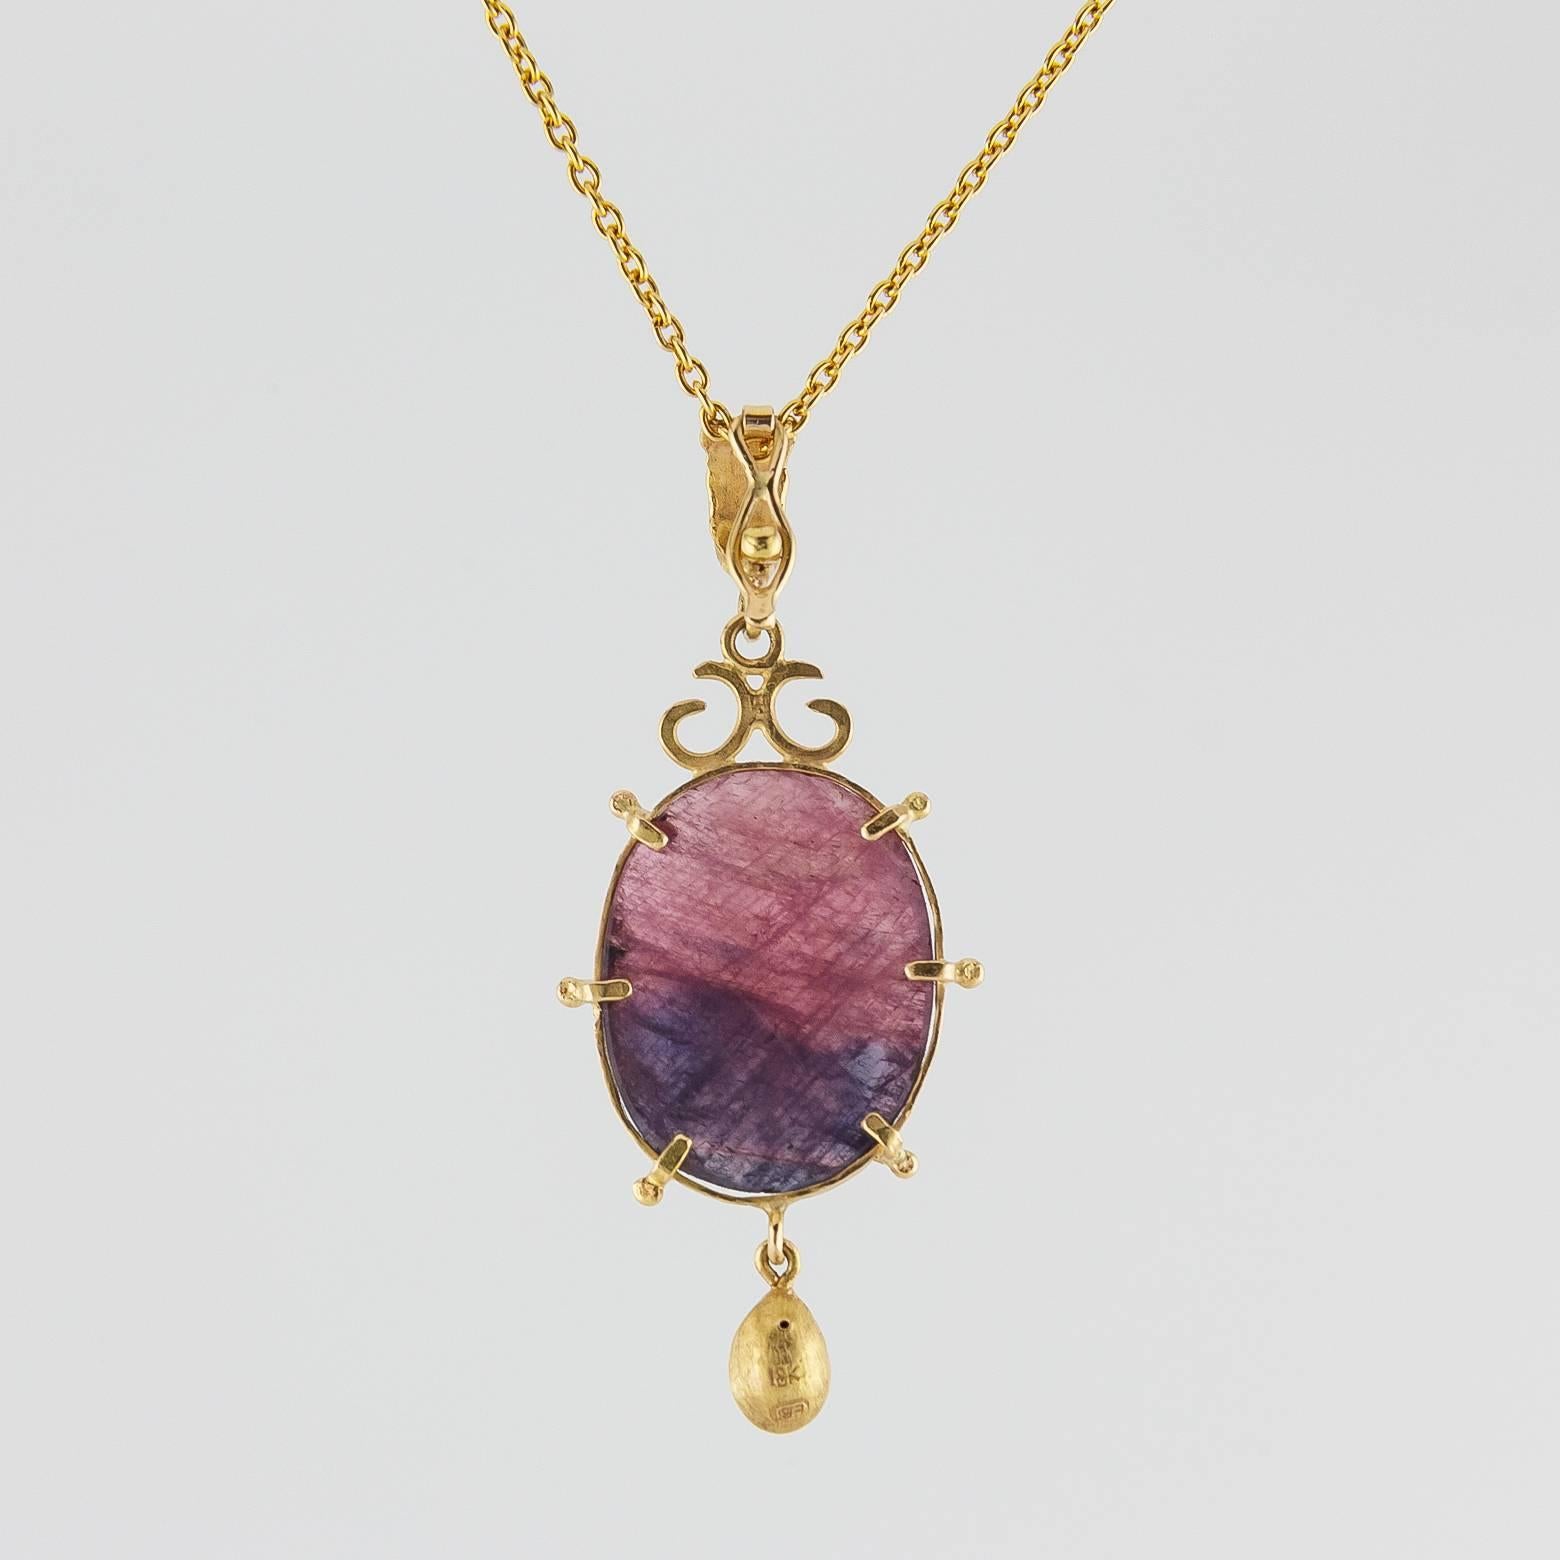 Irregular Shaped Purple Maroon Sapphire Pendant. This exquisite piece is a stunner. It has different shades of purples in a unique setting that lets the imagine run wild- off into the sunset. 18K Yellow Gold hammered with excellence adds to the